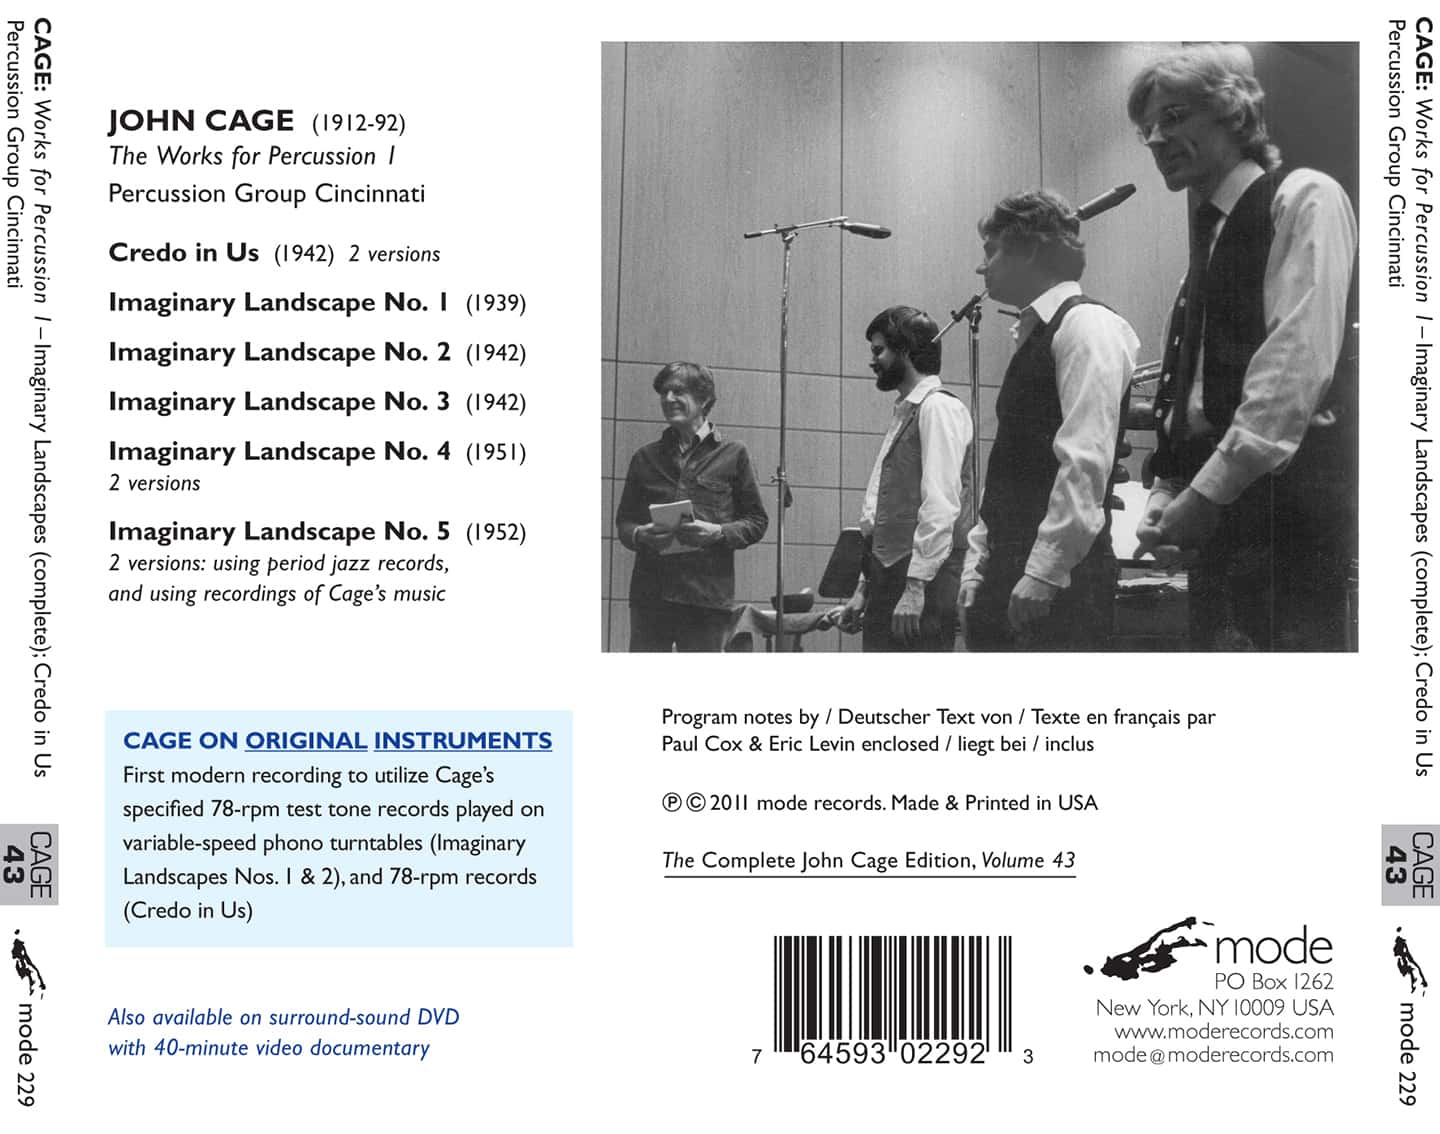 Cage Edition 43 – The Works for Percussion I